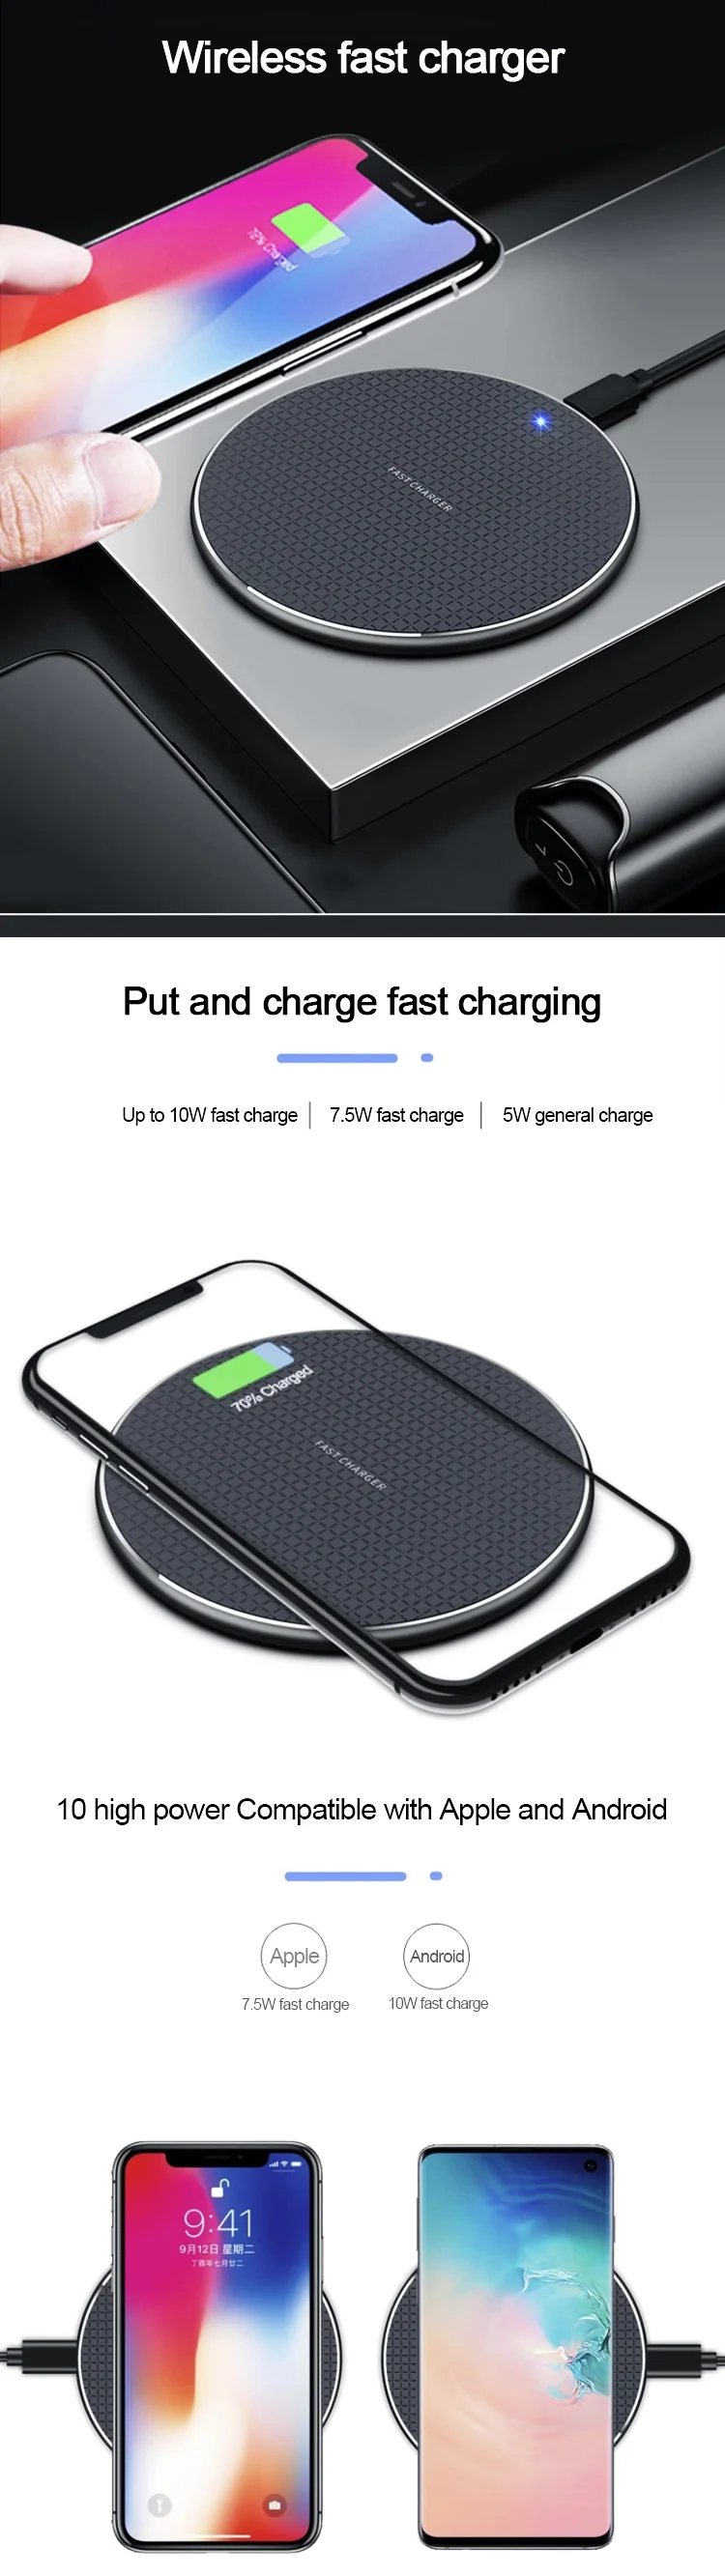 2021 Latest 10w Ultra Thin Metal Qi Wireless Fast Charger Portable Wireless Charging Mat Pad With Led Display Light For Iphone Buy 10w Ultra Thin Metal Qi Wireless Fast Charger 2021 New